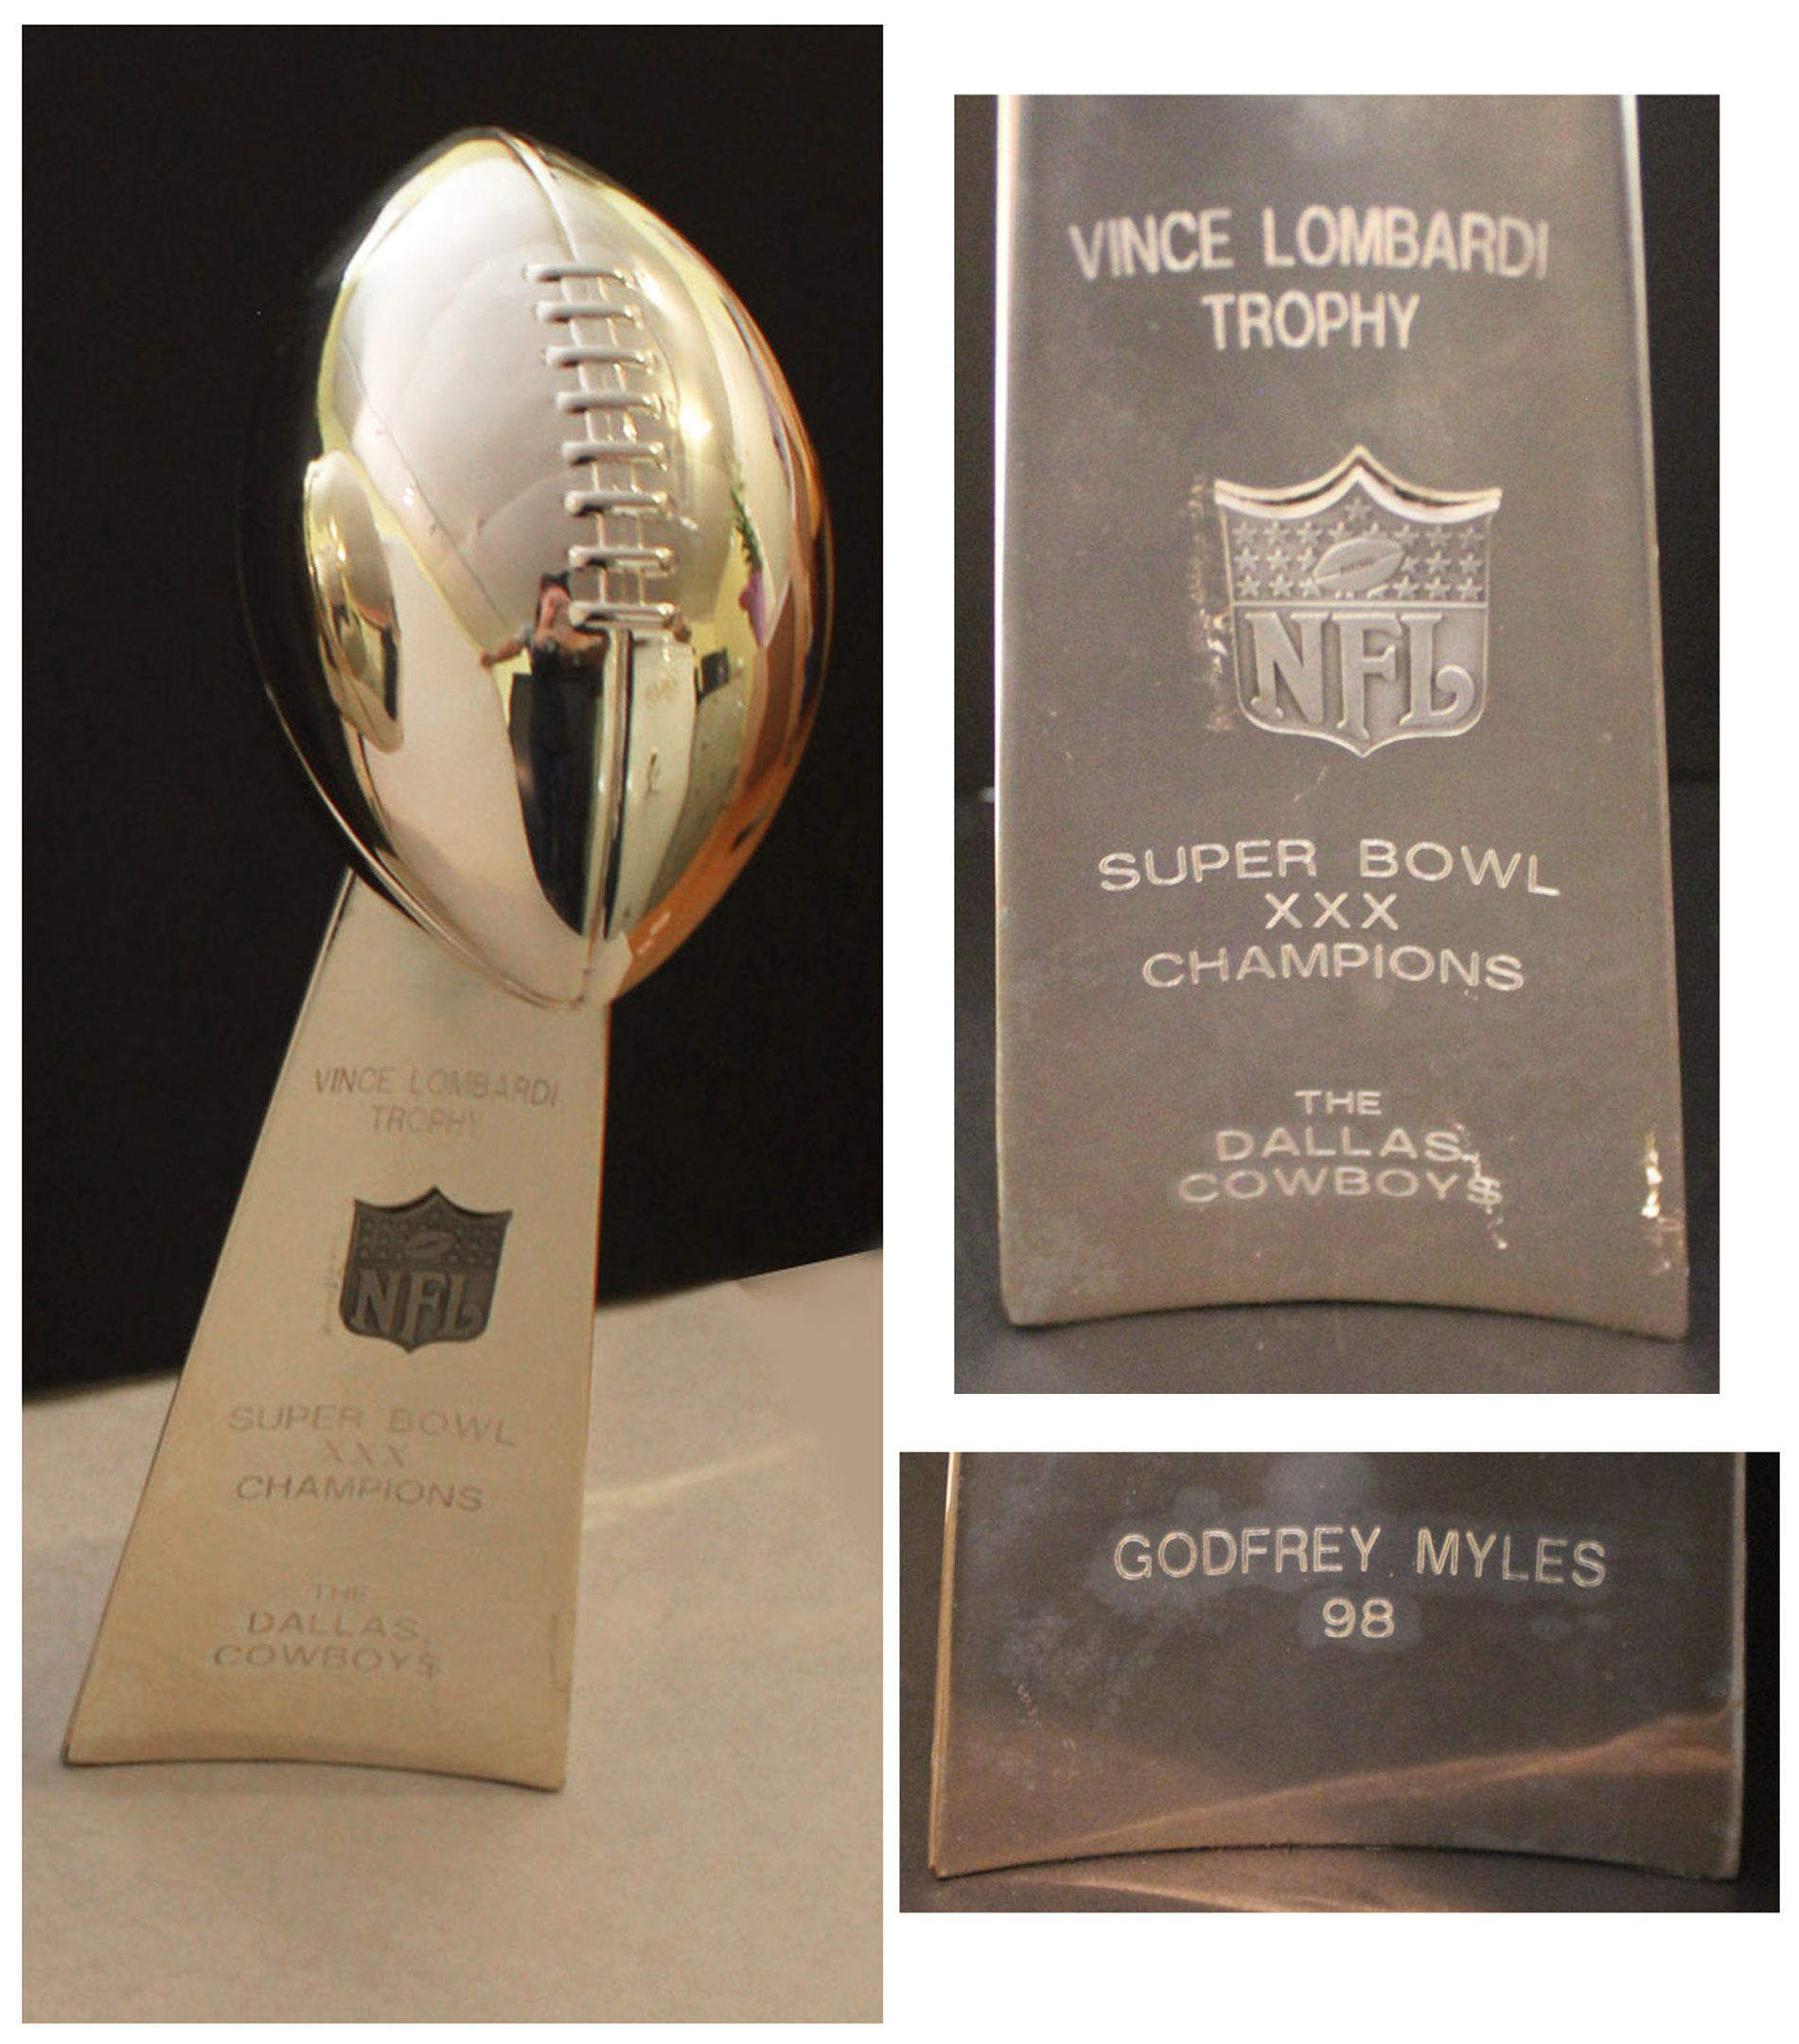 Heisman Trophy Super Bowl trophy auction Vince Lombardi Super Bowl XXX Trophy -- Exceedingly Rare Trophy Was Made for Players of Only a Few Super Bowl Winning Teams -- Given to Cowboys Linebacker Godfrey Myles